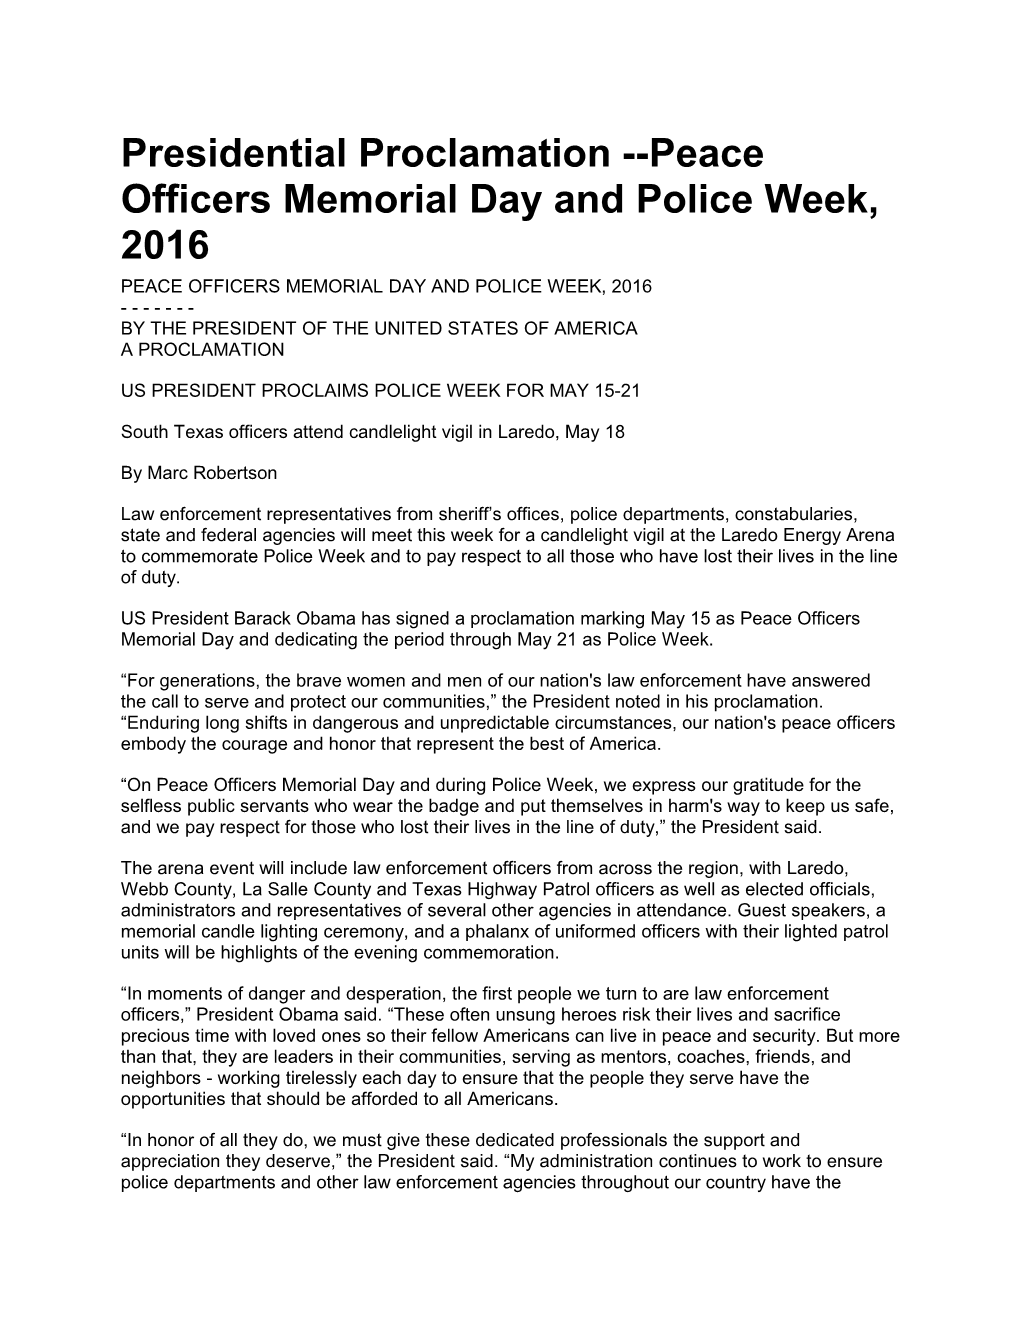 Presidential Proclamation Peace Officers Memorial Day and Police Week, 2016